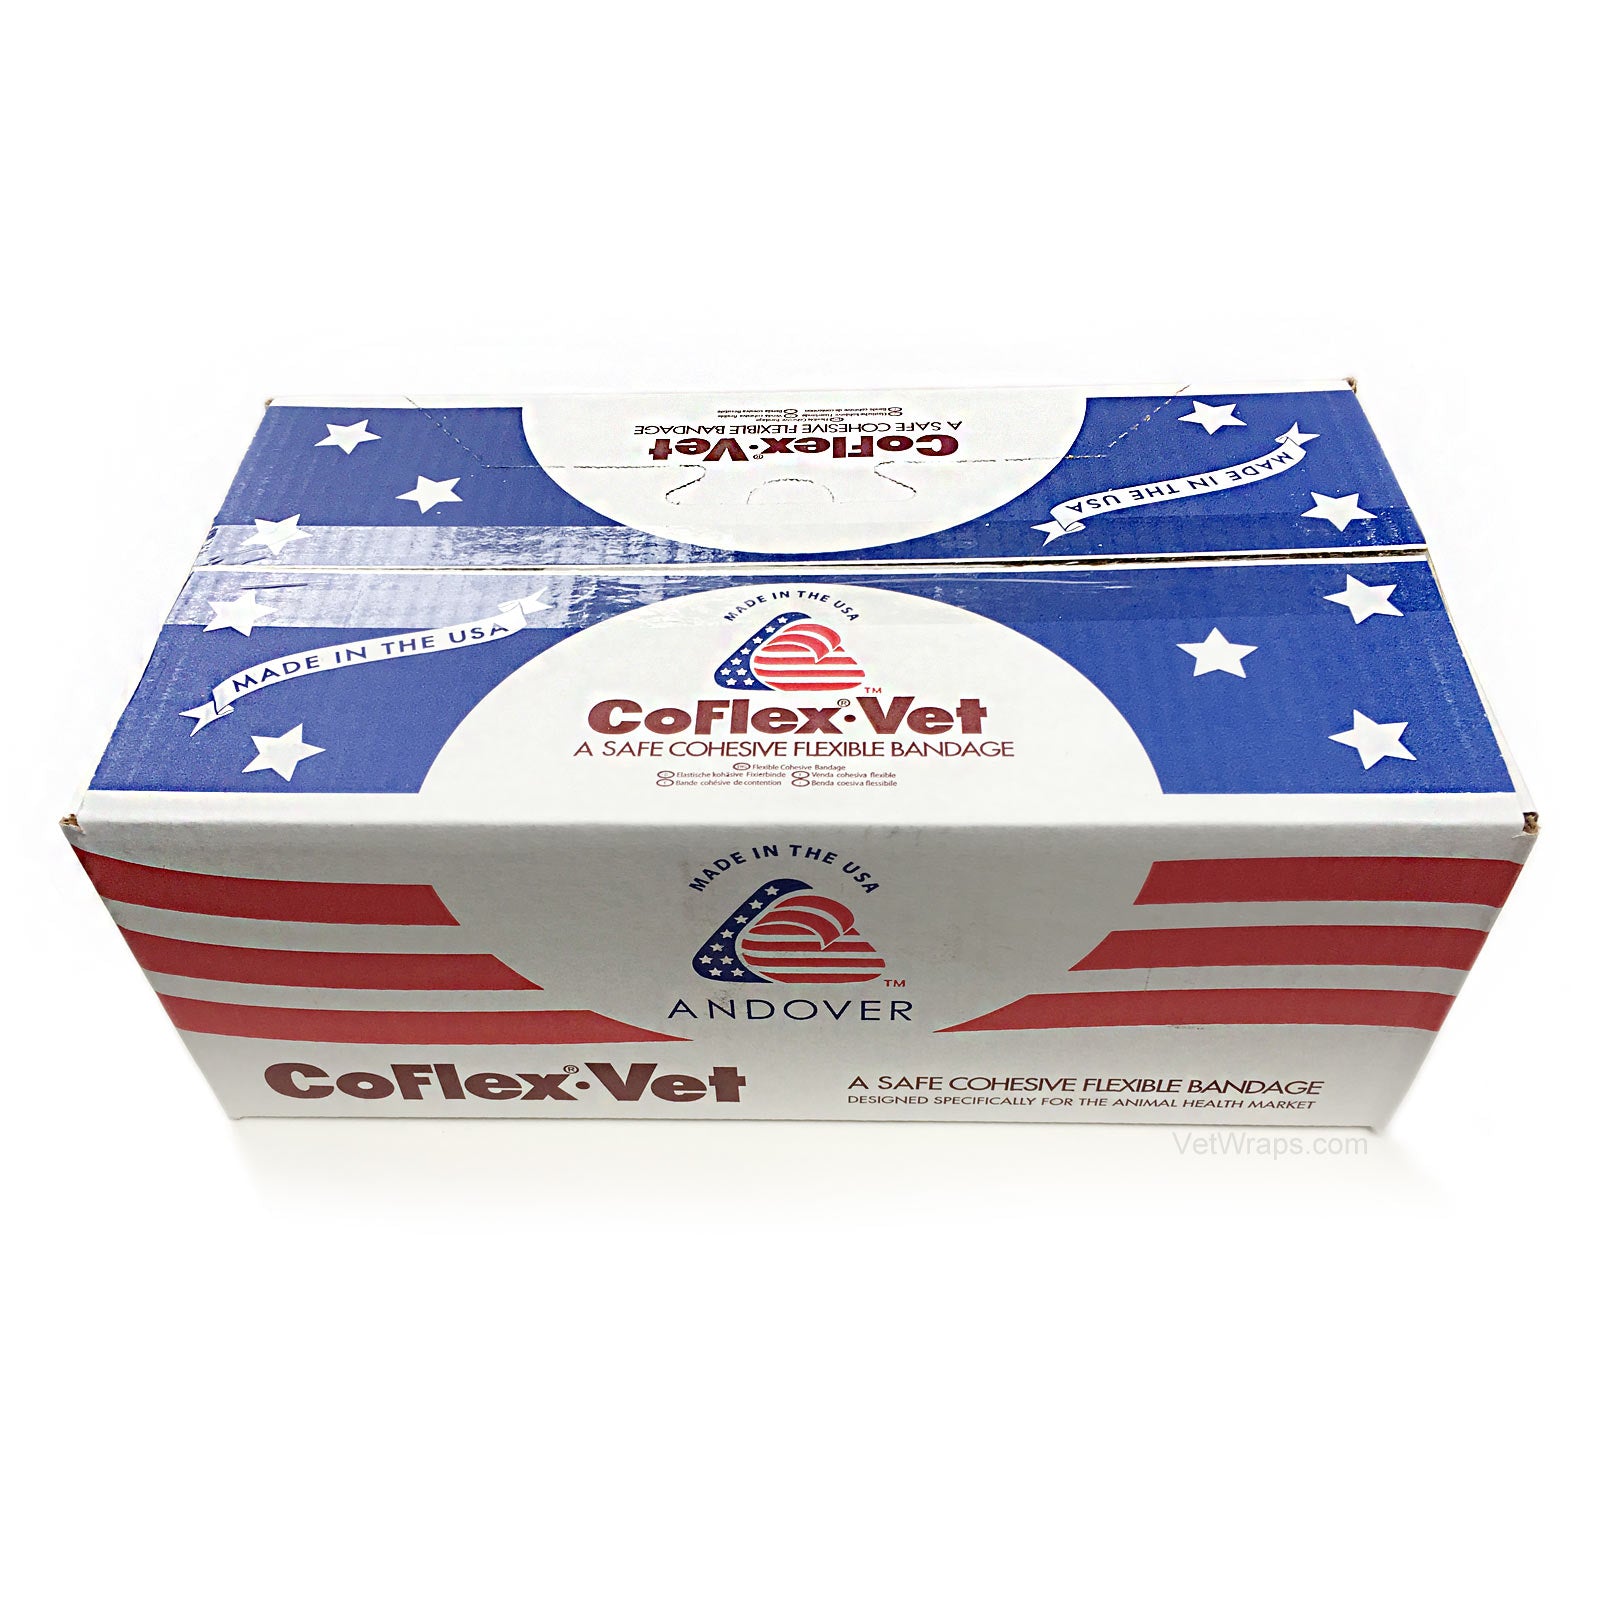 Andover CoFlex Vet Cohesive Bandage Box for 18 Roll Pack